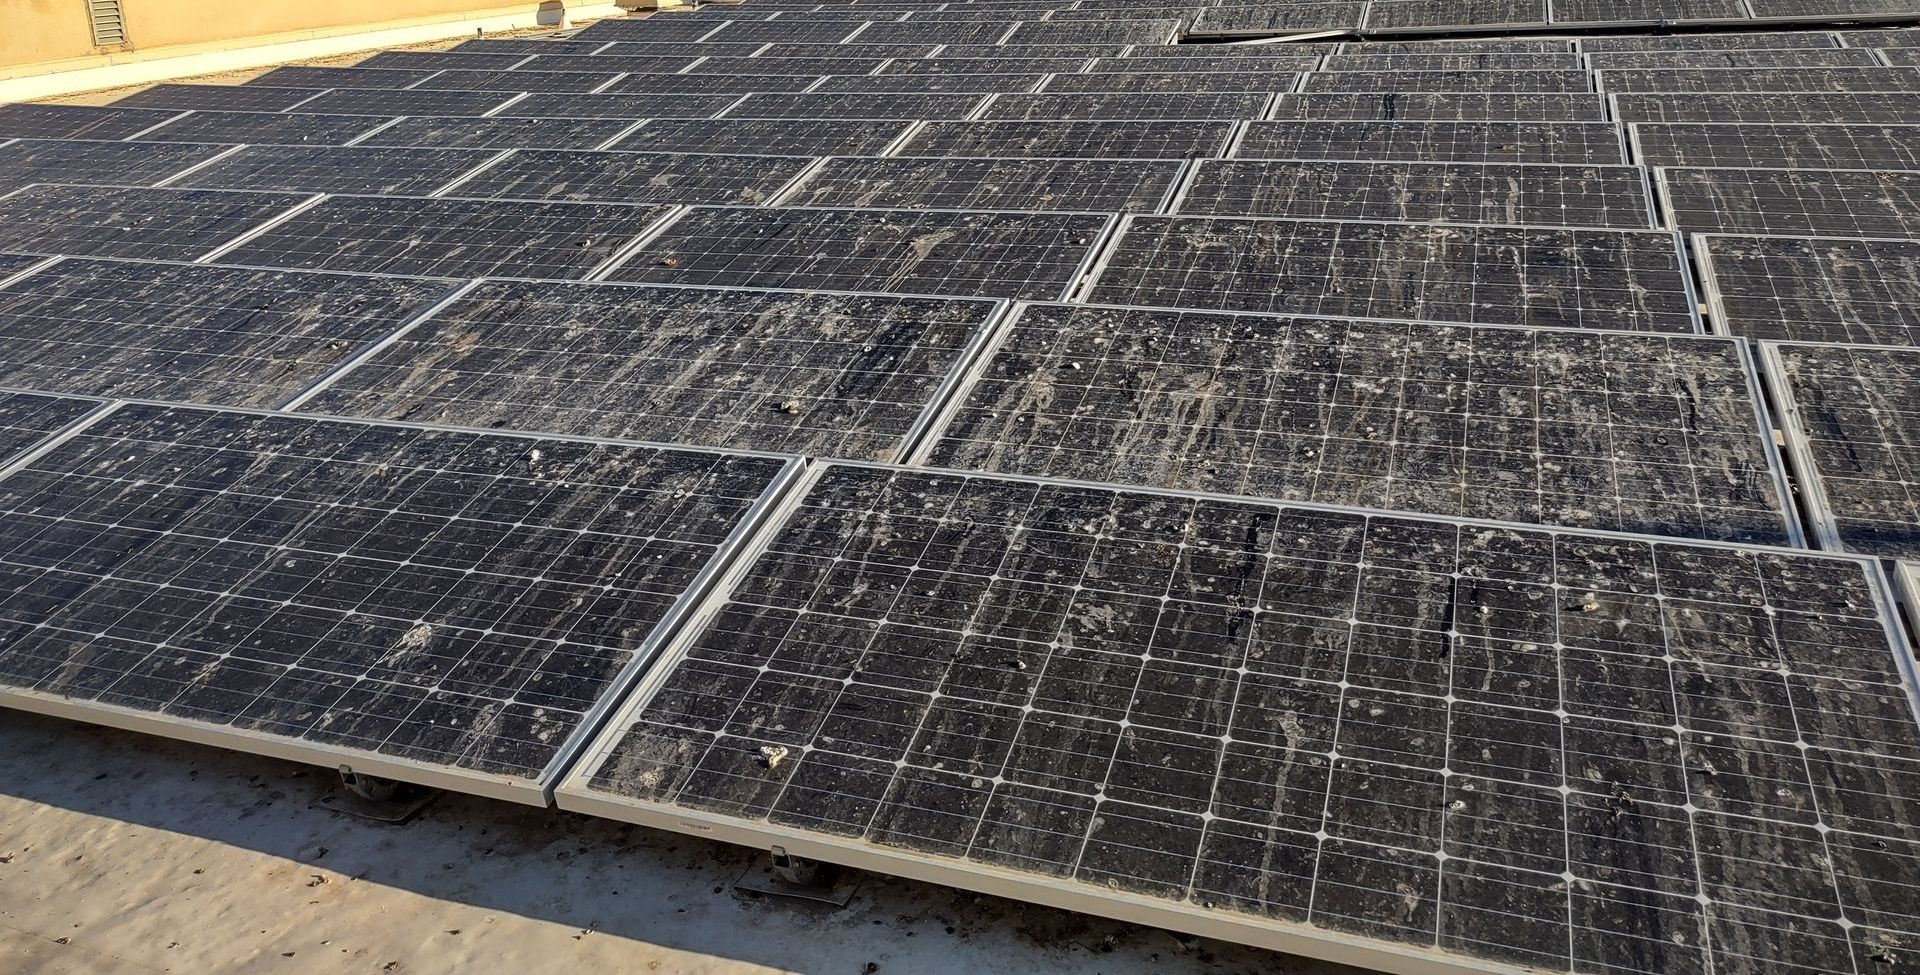 a row of dirty solar panels on a roof